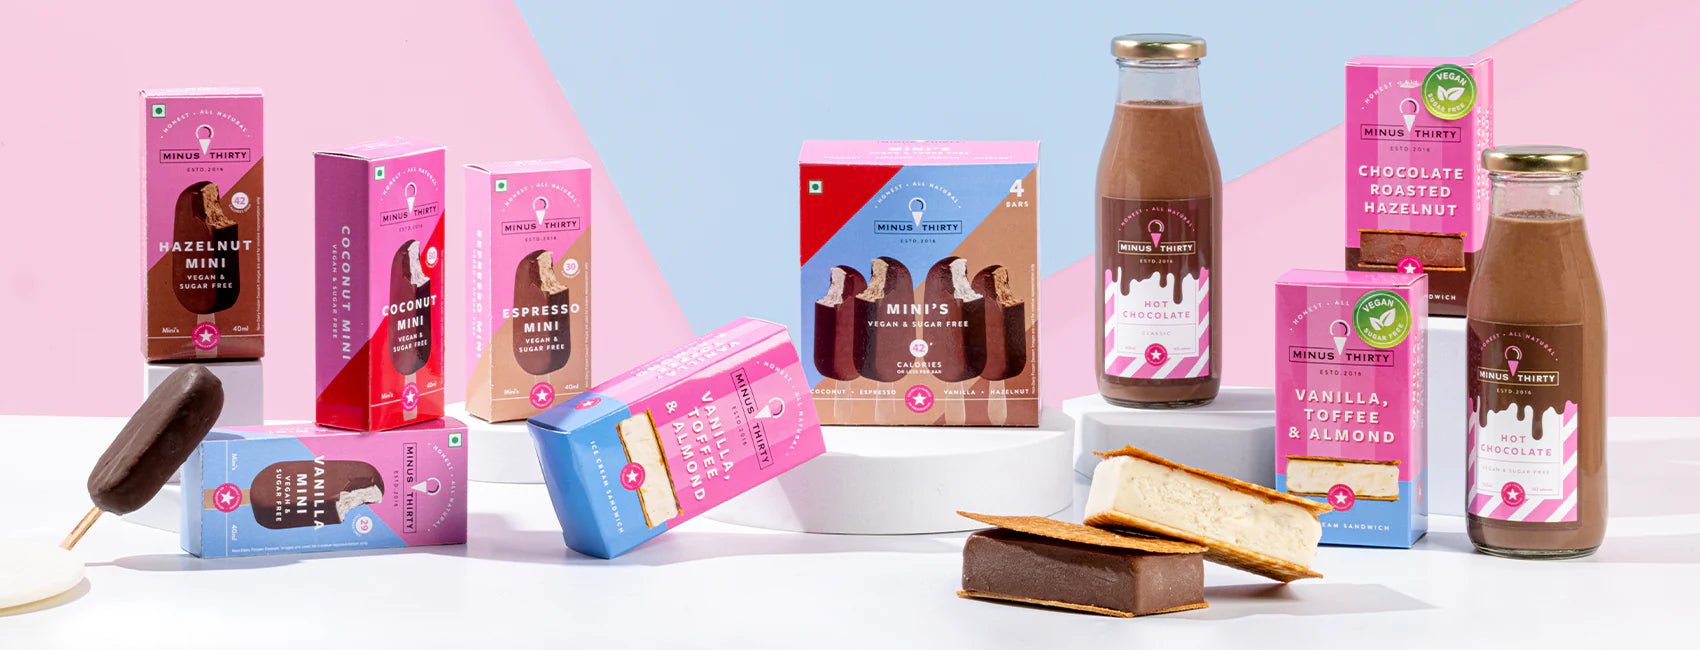 Elevate Your Gift-Giving Game with Minus 30 Vegan Hot Chocolate and Sugar-Free Ice Cream